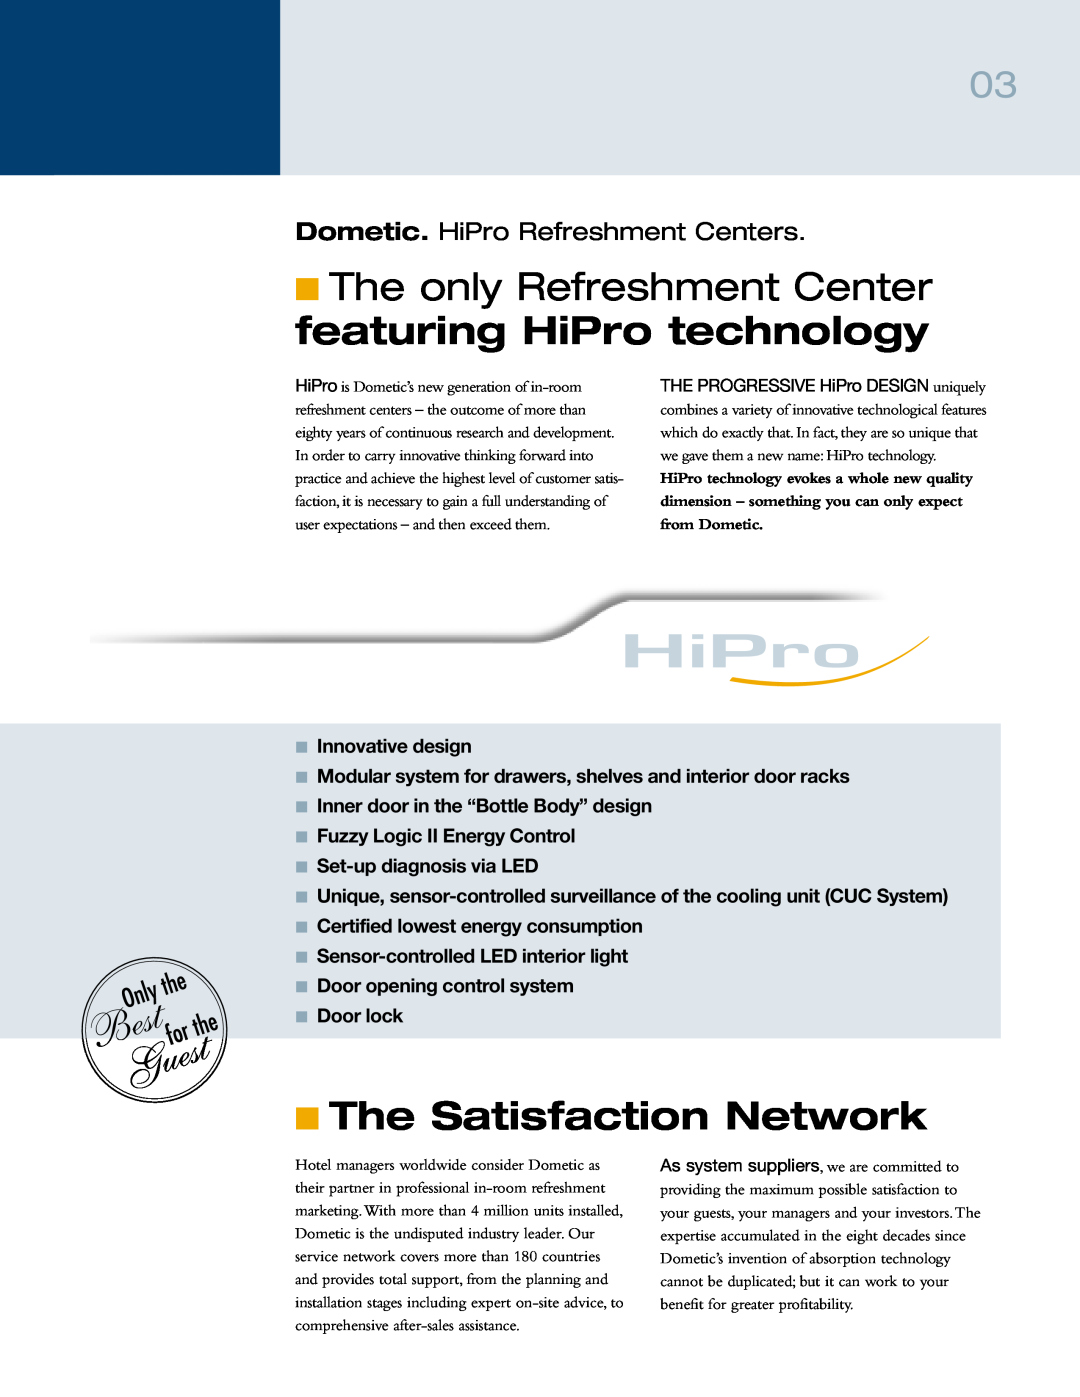 Dometic 6000 manual The only Refreshment Center featuring HiPro technology, The Satisfaction Network, Innovative design 